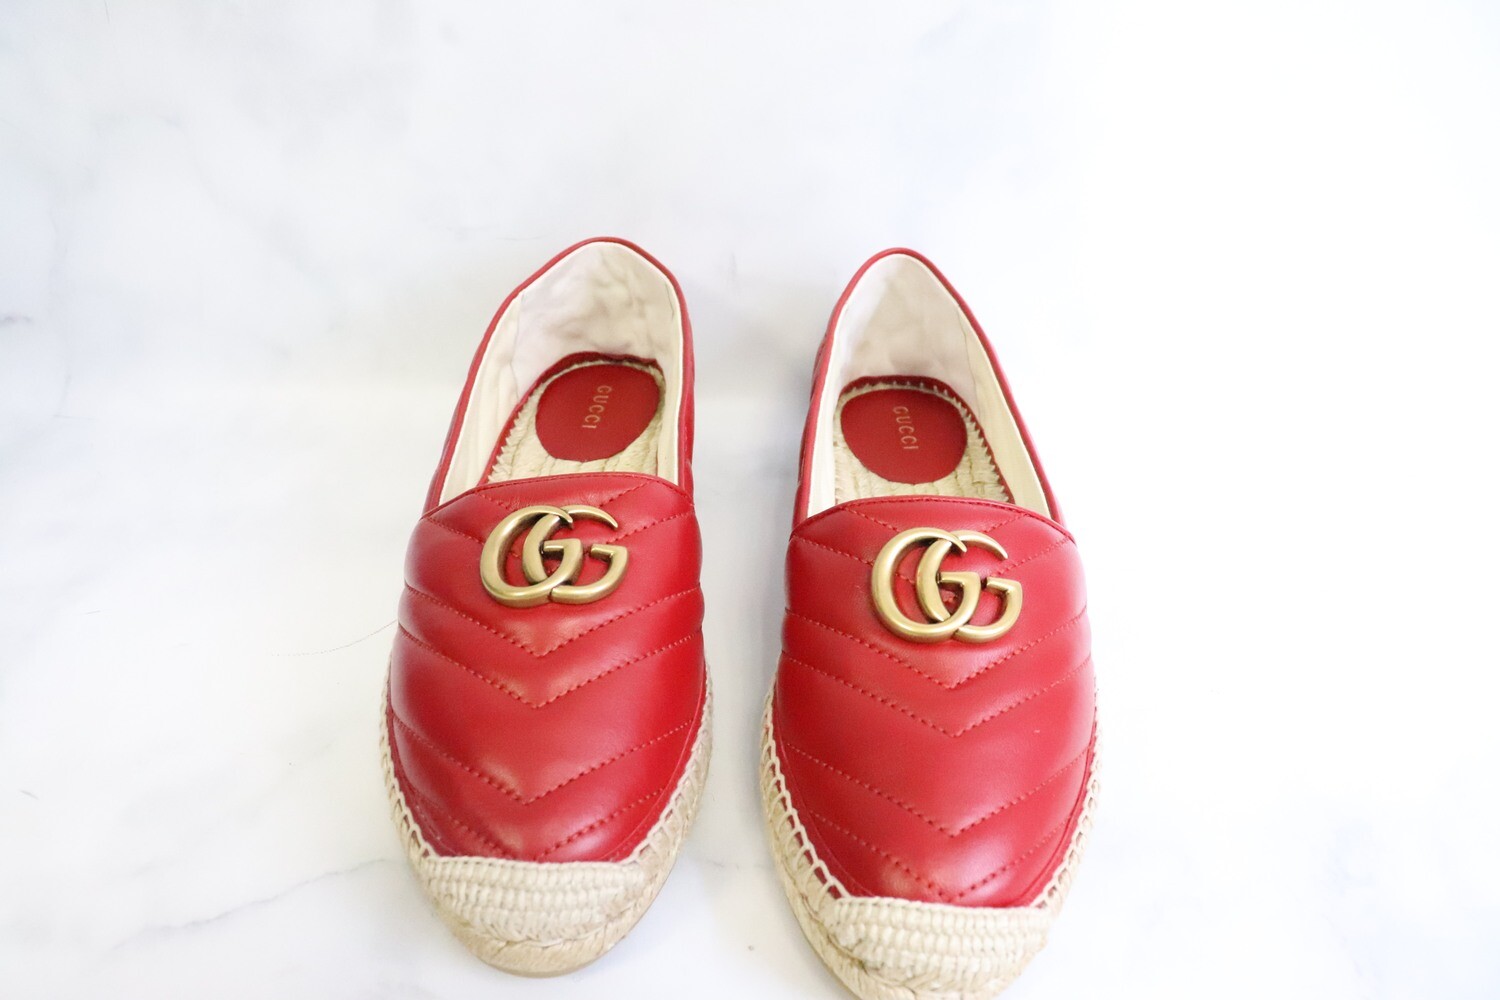 * BOSTON Gucci Marmont Espadrilles, Hibiscus Red, Size 39.5, New in Box